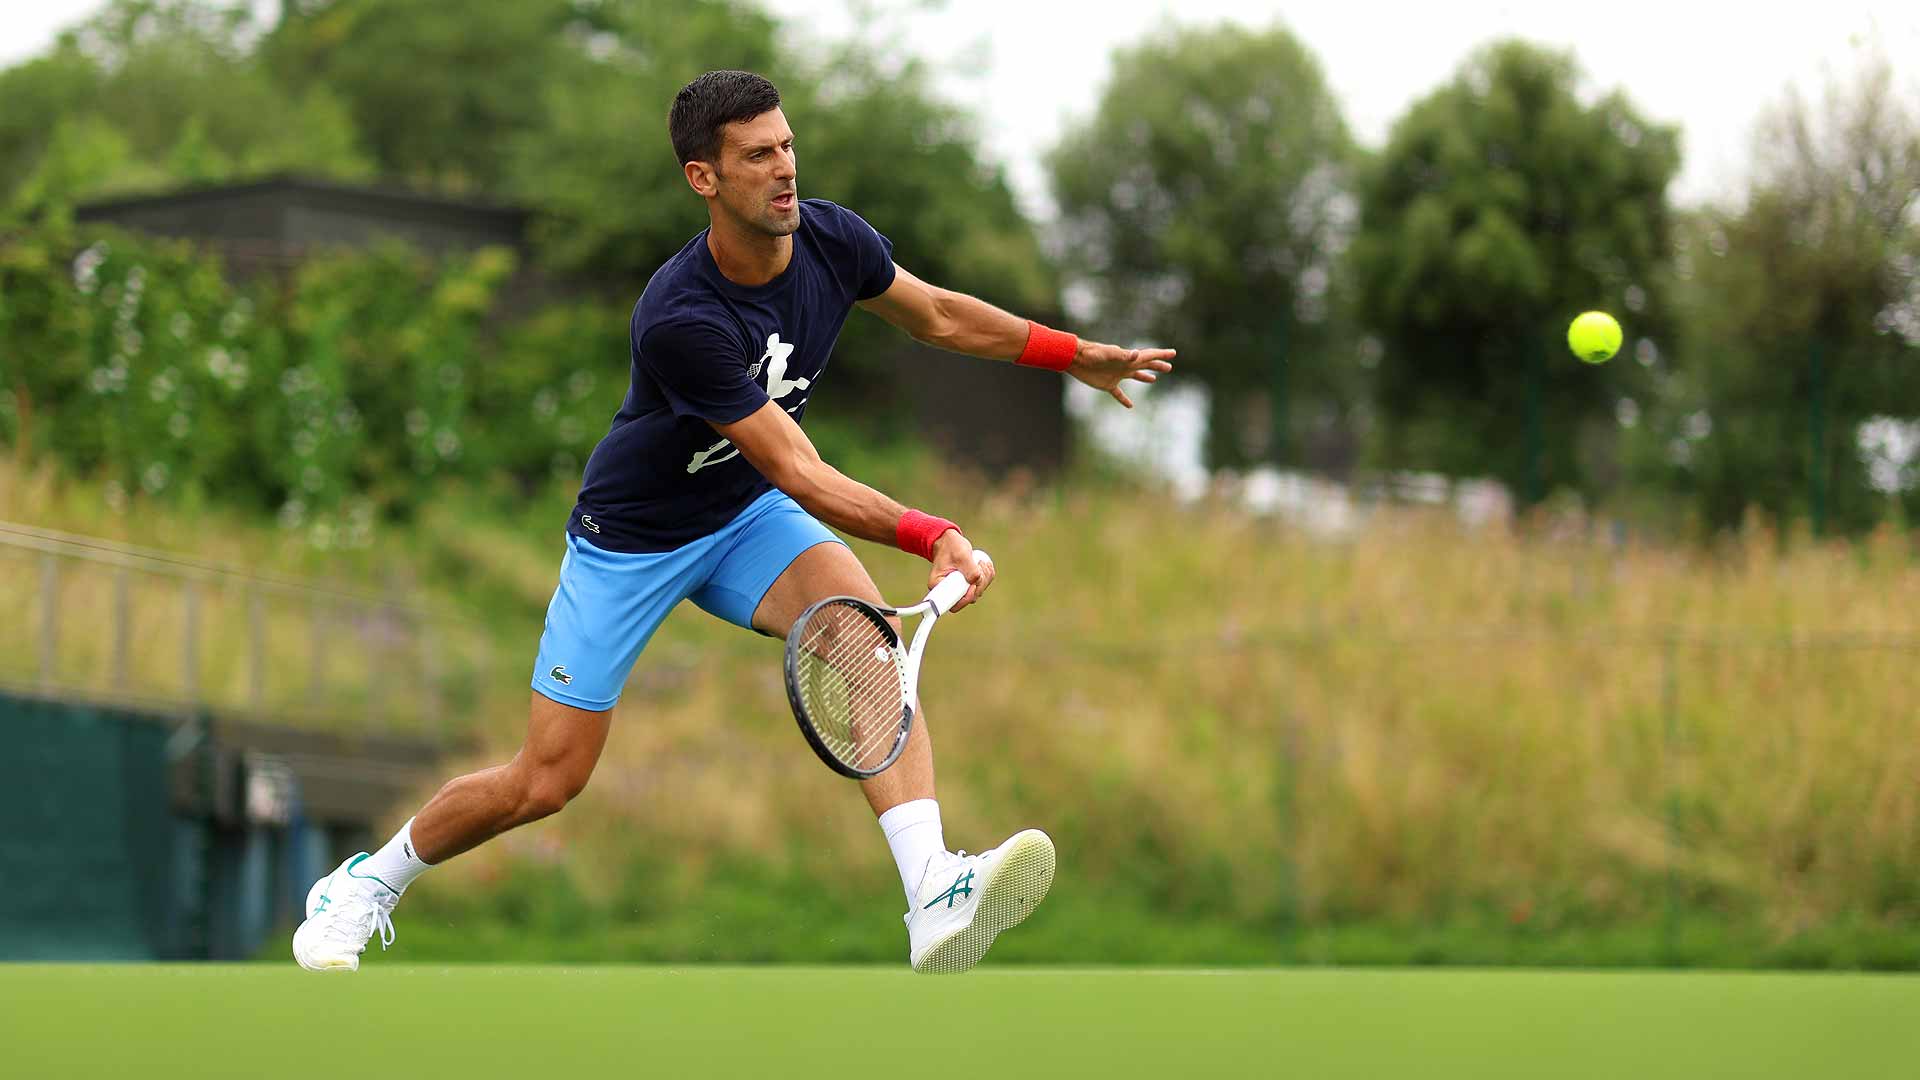 Novak Djokovic, whose Wimbledon preparations are well underway, will pursue his eighth title at the grass-court major over the coming fortnight.